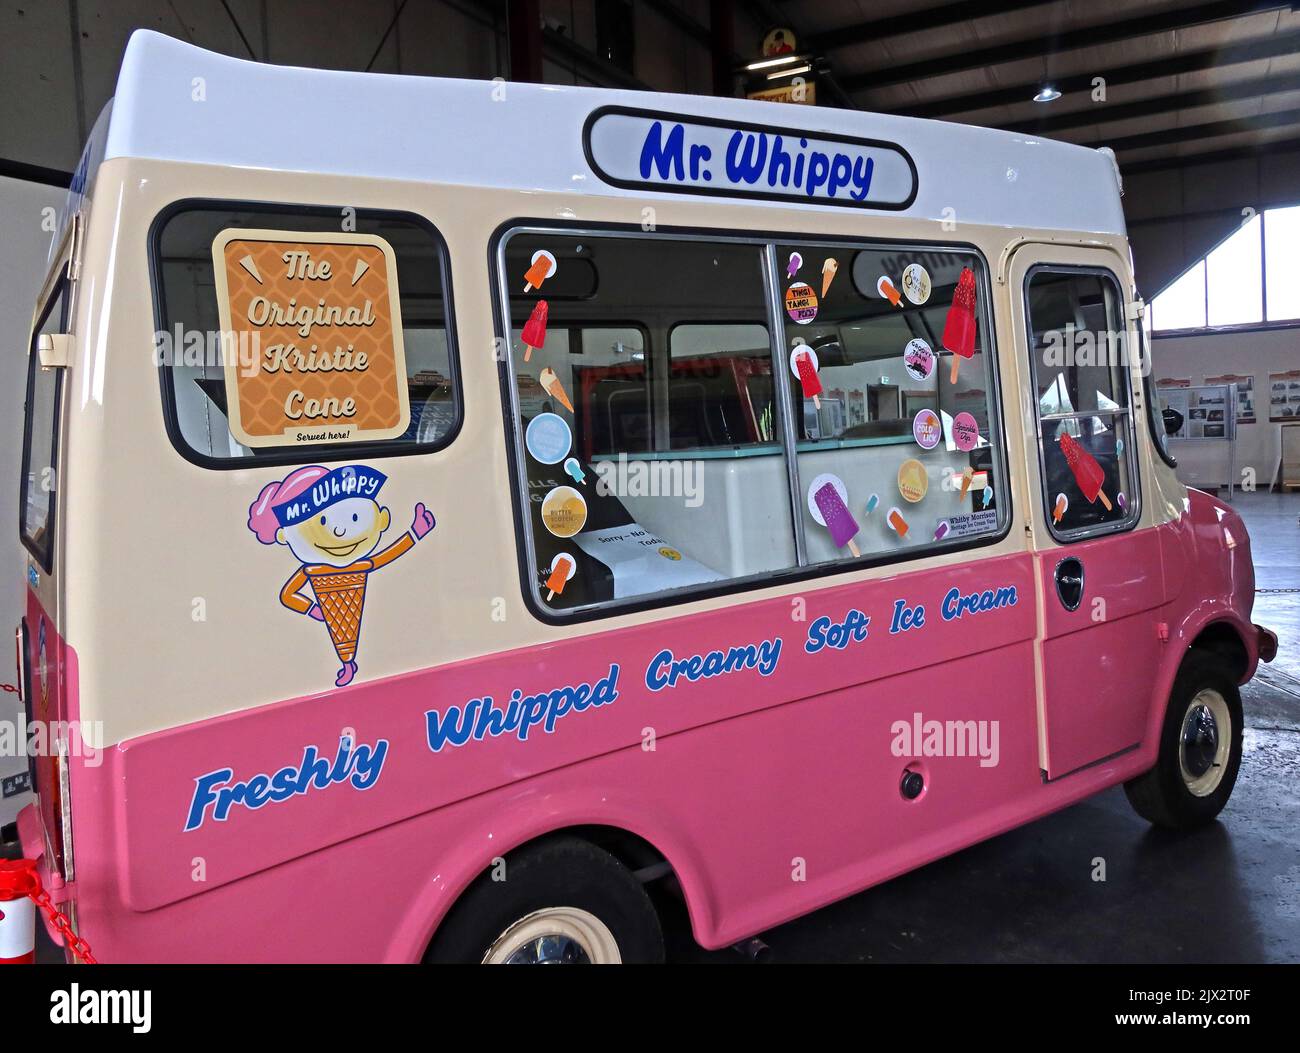 Pink Mr Whippy, Freshly Whipped Creamy Soft Ice Cream van, built by Whitby Morrison, Crewe, Cheshire, England, UK, CW1 6TT Stock Photo